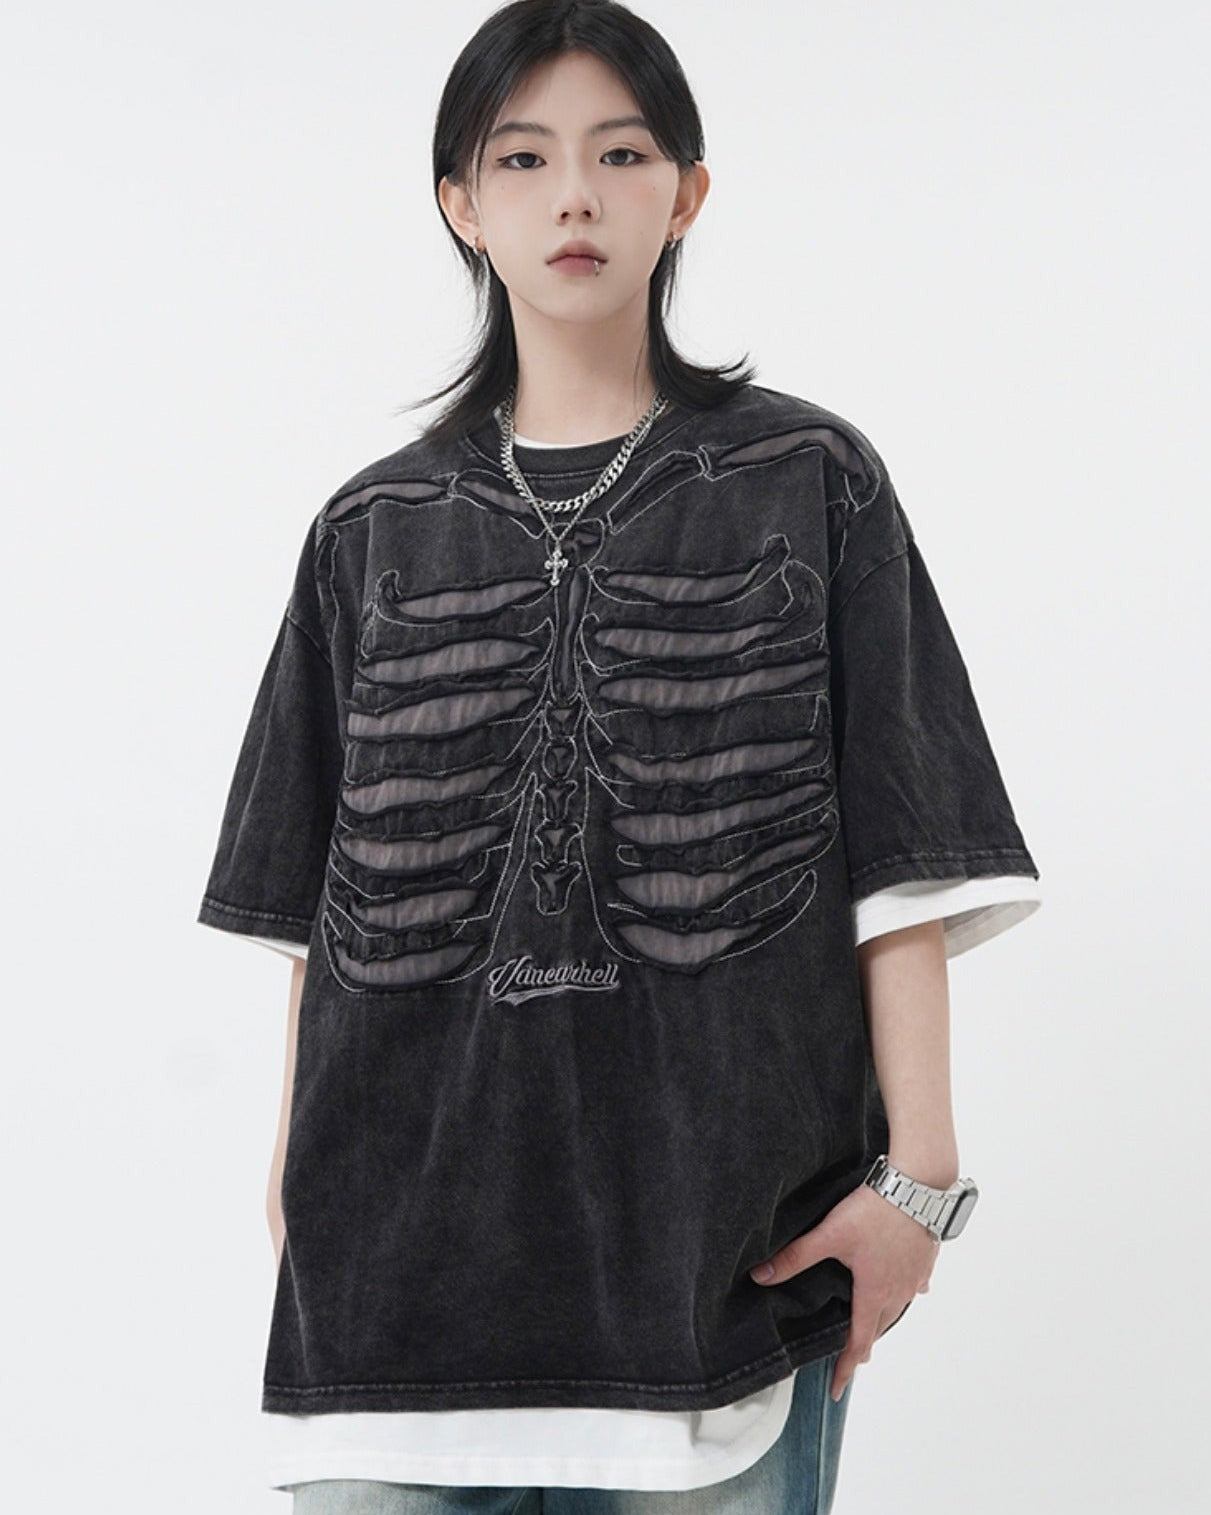 Bones Ripped Fabric T-Shirt Korean Street Fashion T-Shirt By Made Extreme Shop Online at OH Vault